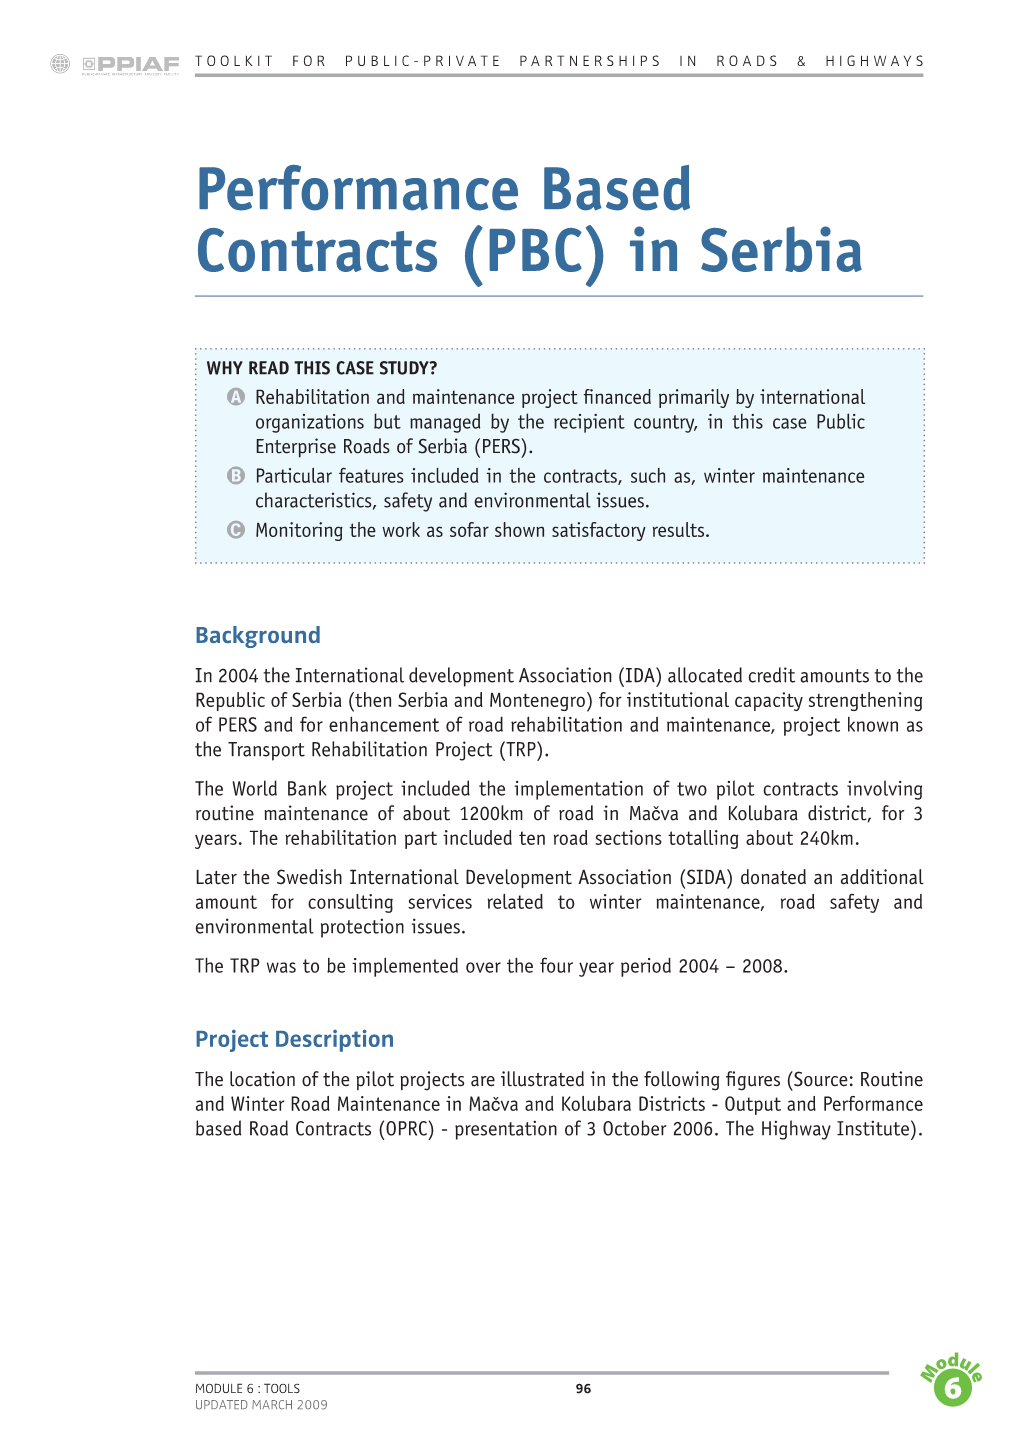 Performance Based Contracts (PBC) in Serbia